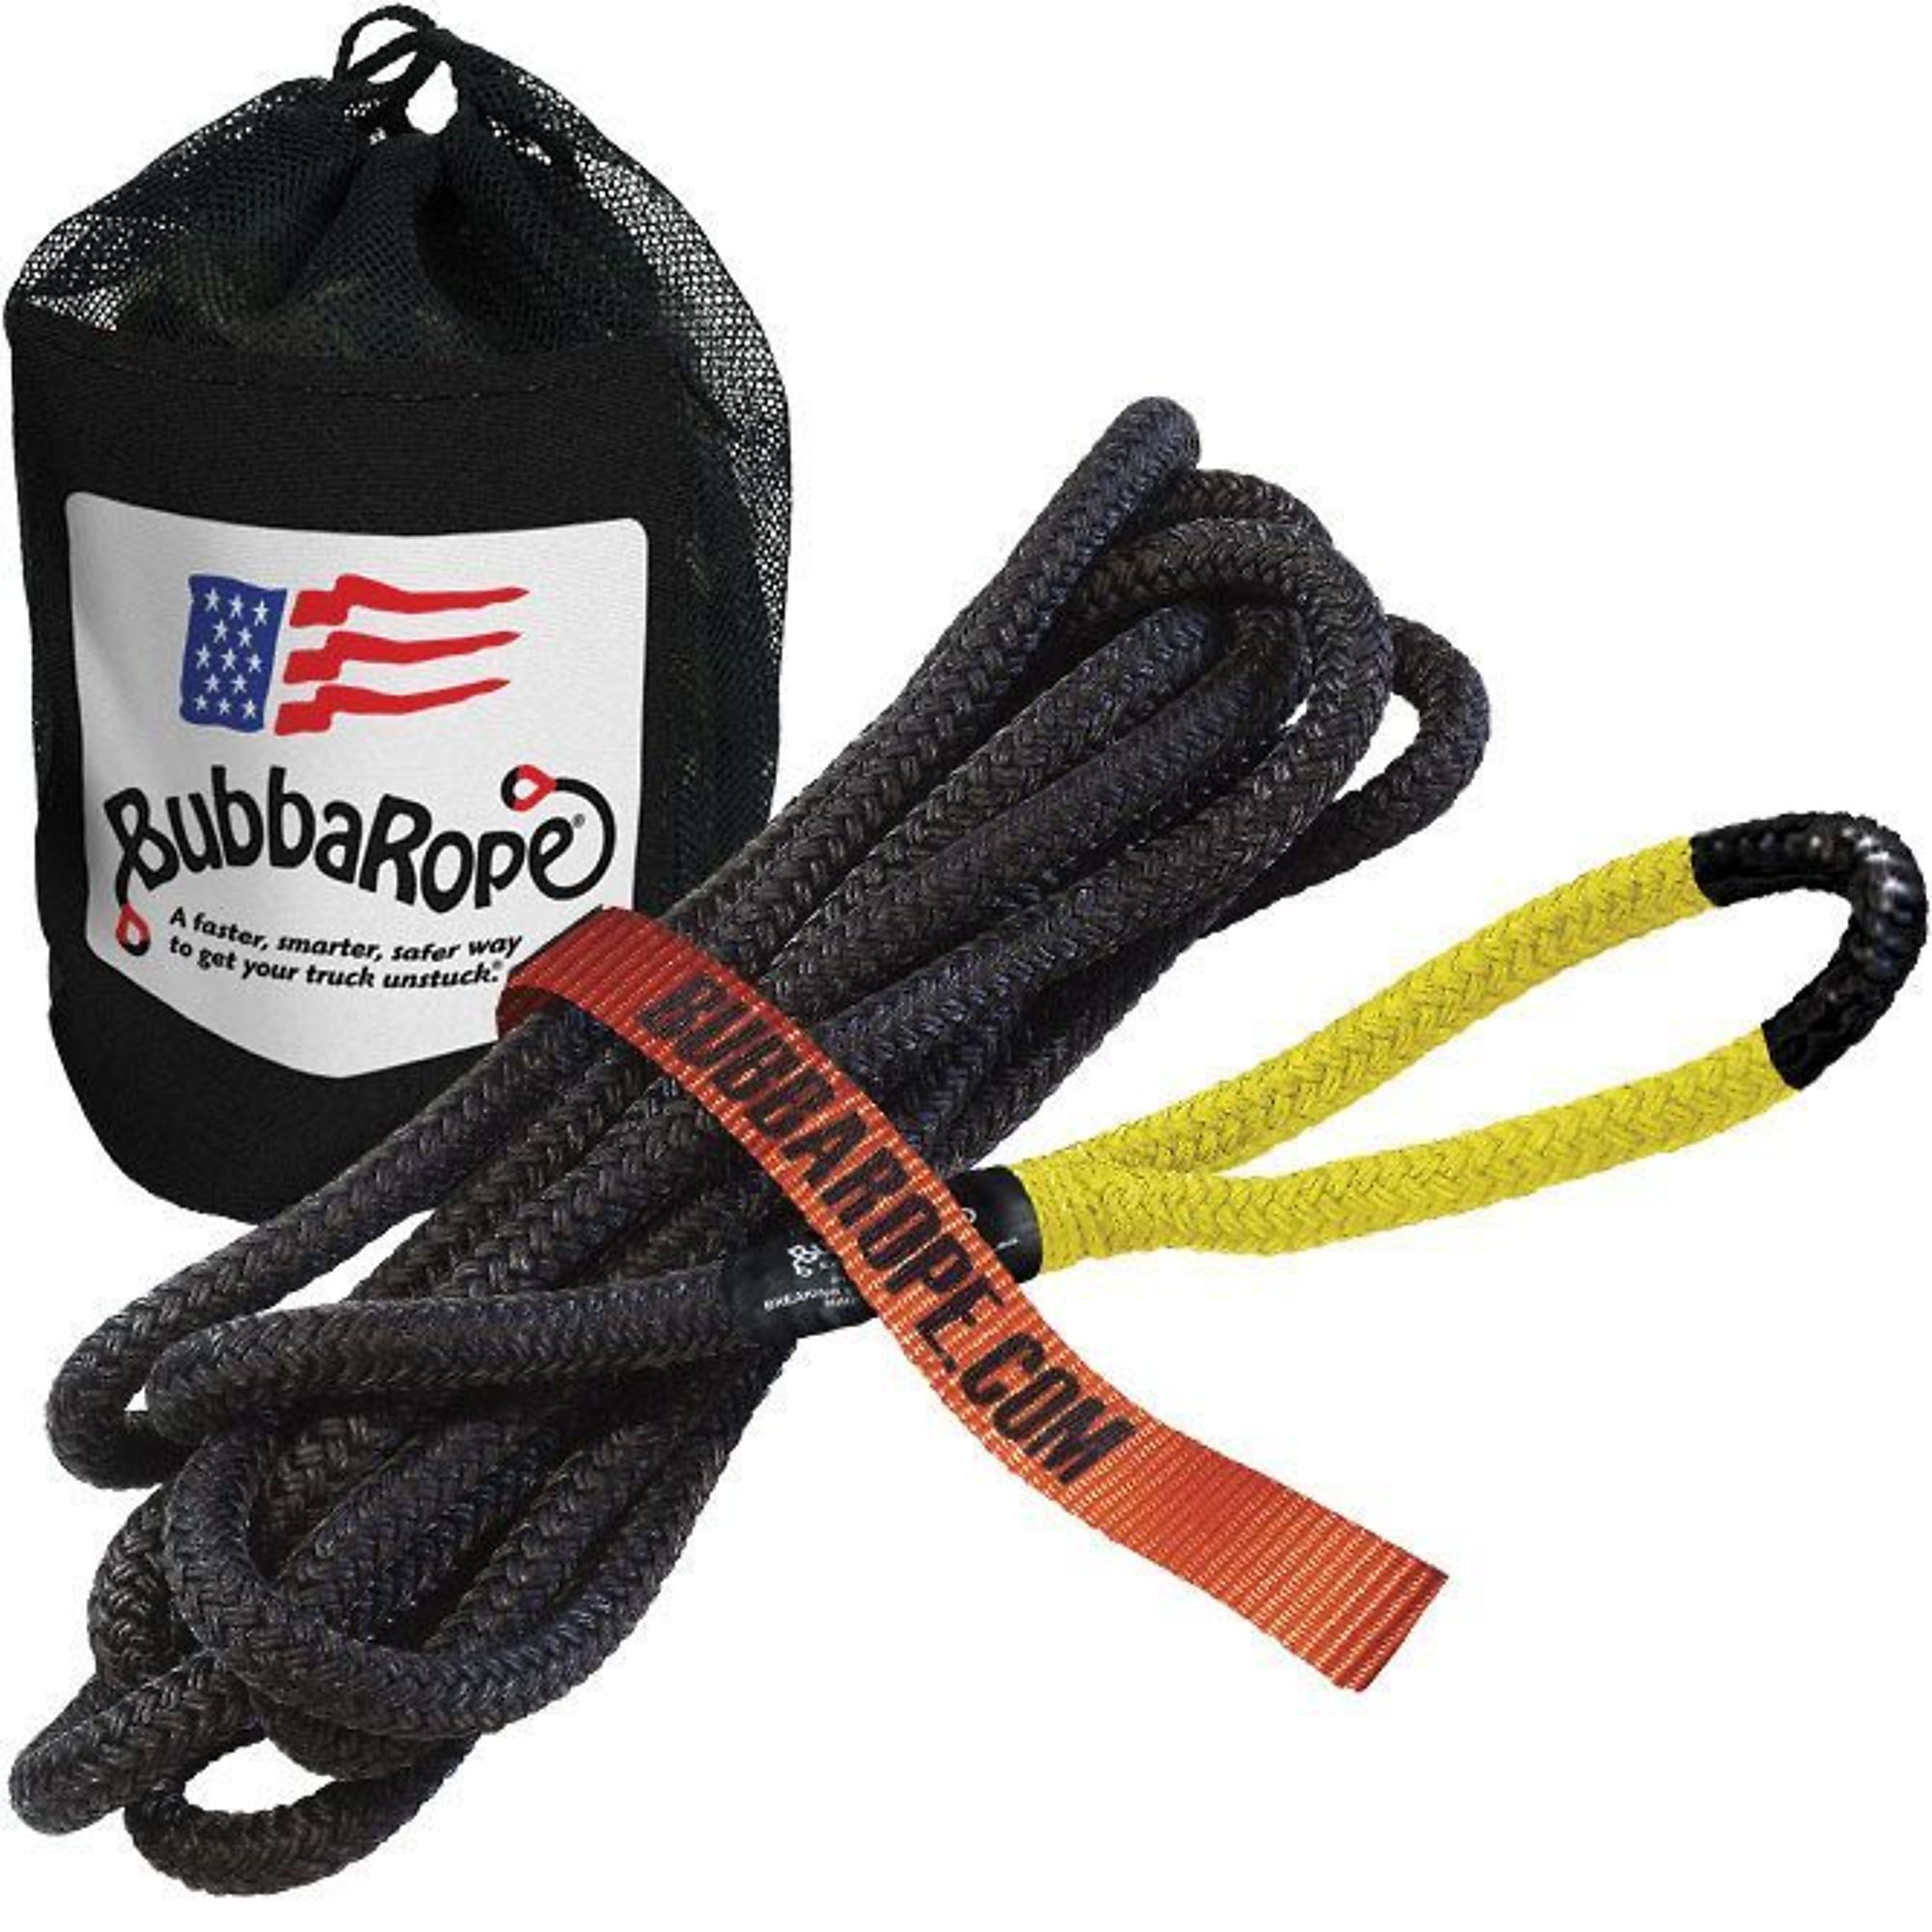 Bubba Rope, safely extract ATVs, UTVs, side-by-sides, Length 240 in, Material HMPE, Model 176650YWG